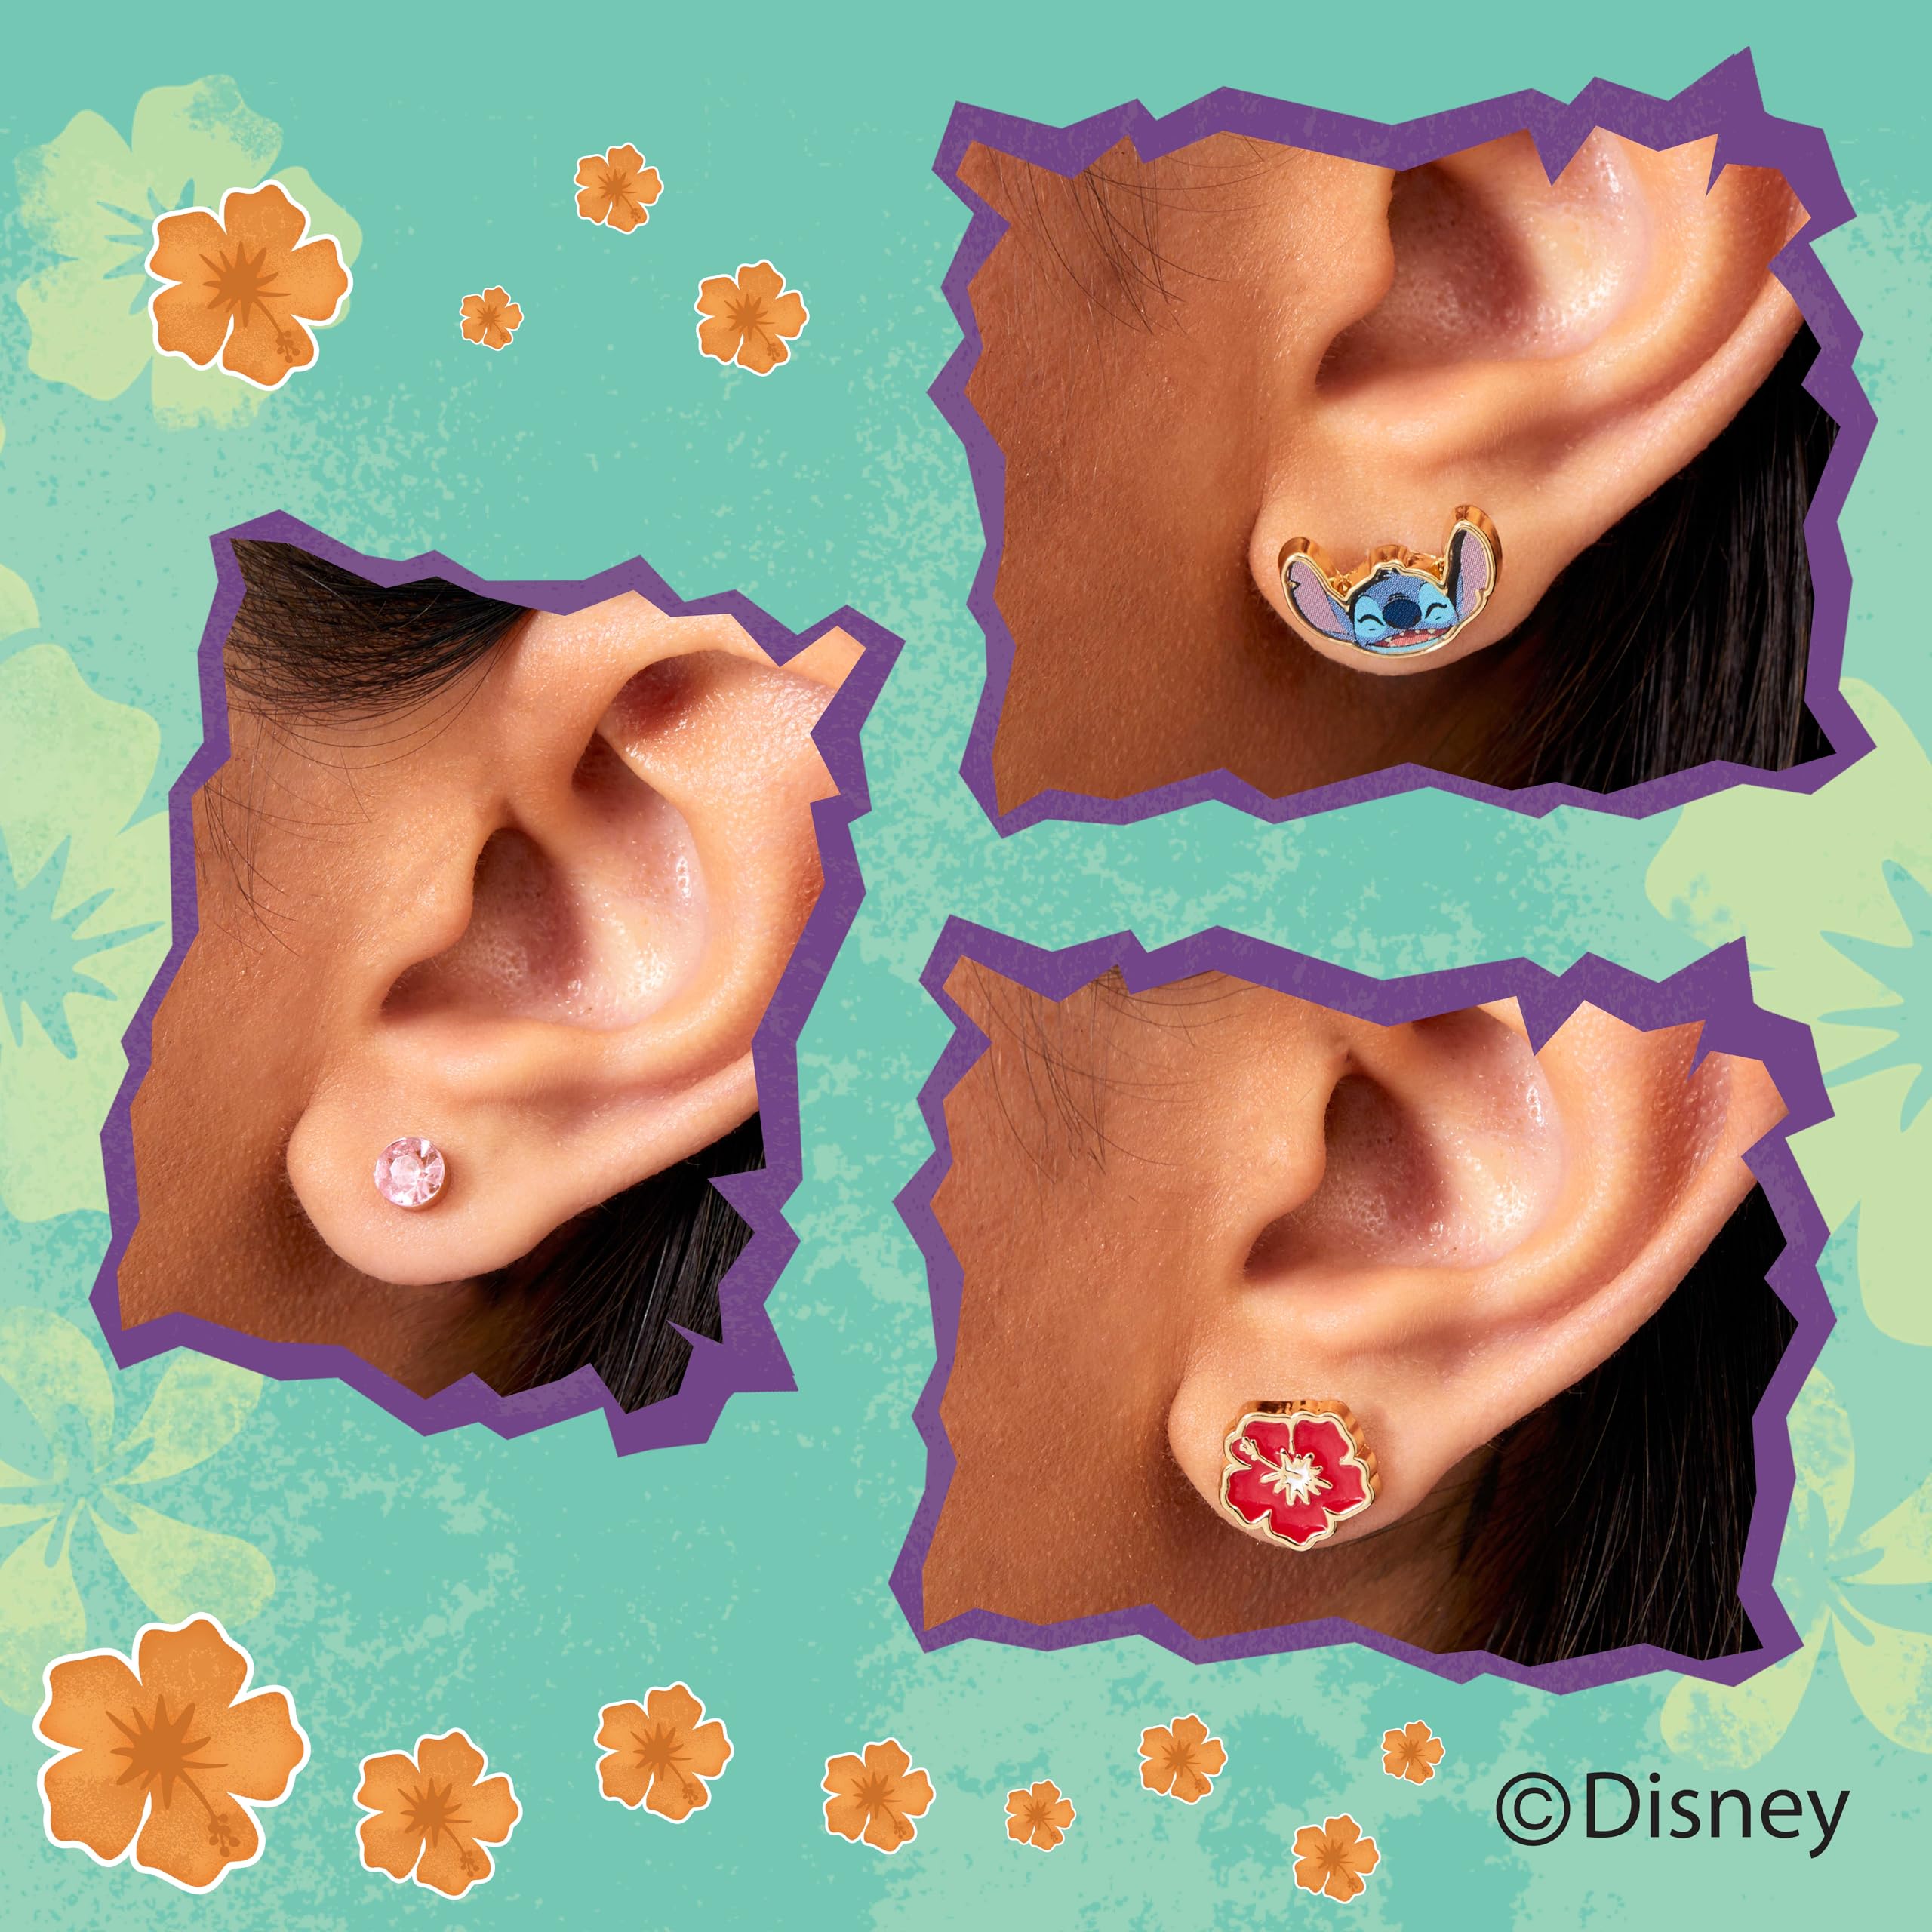 Disney Girls Stitch Earrings 3-Piece Set Officially Licensed - Set of 3 Stitch Stud Earrings for Girls - Stitch Jewelry